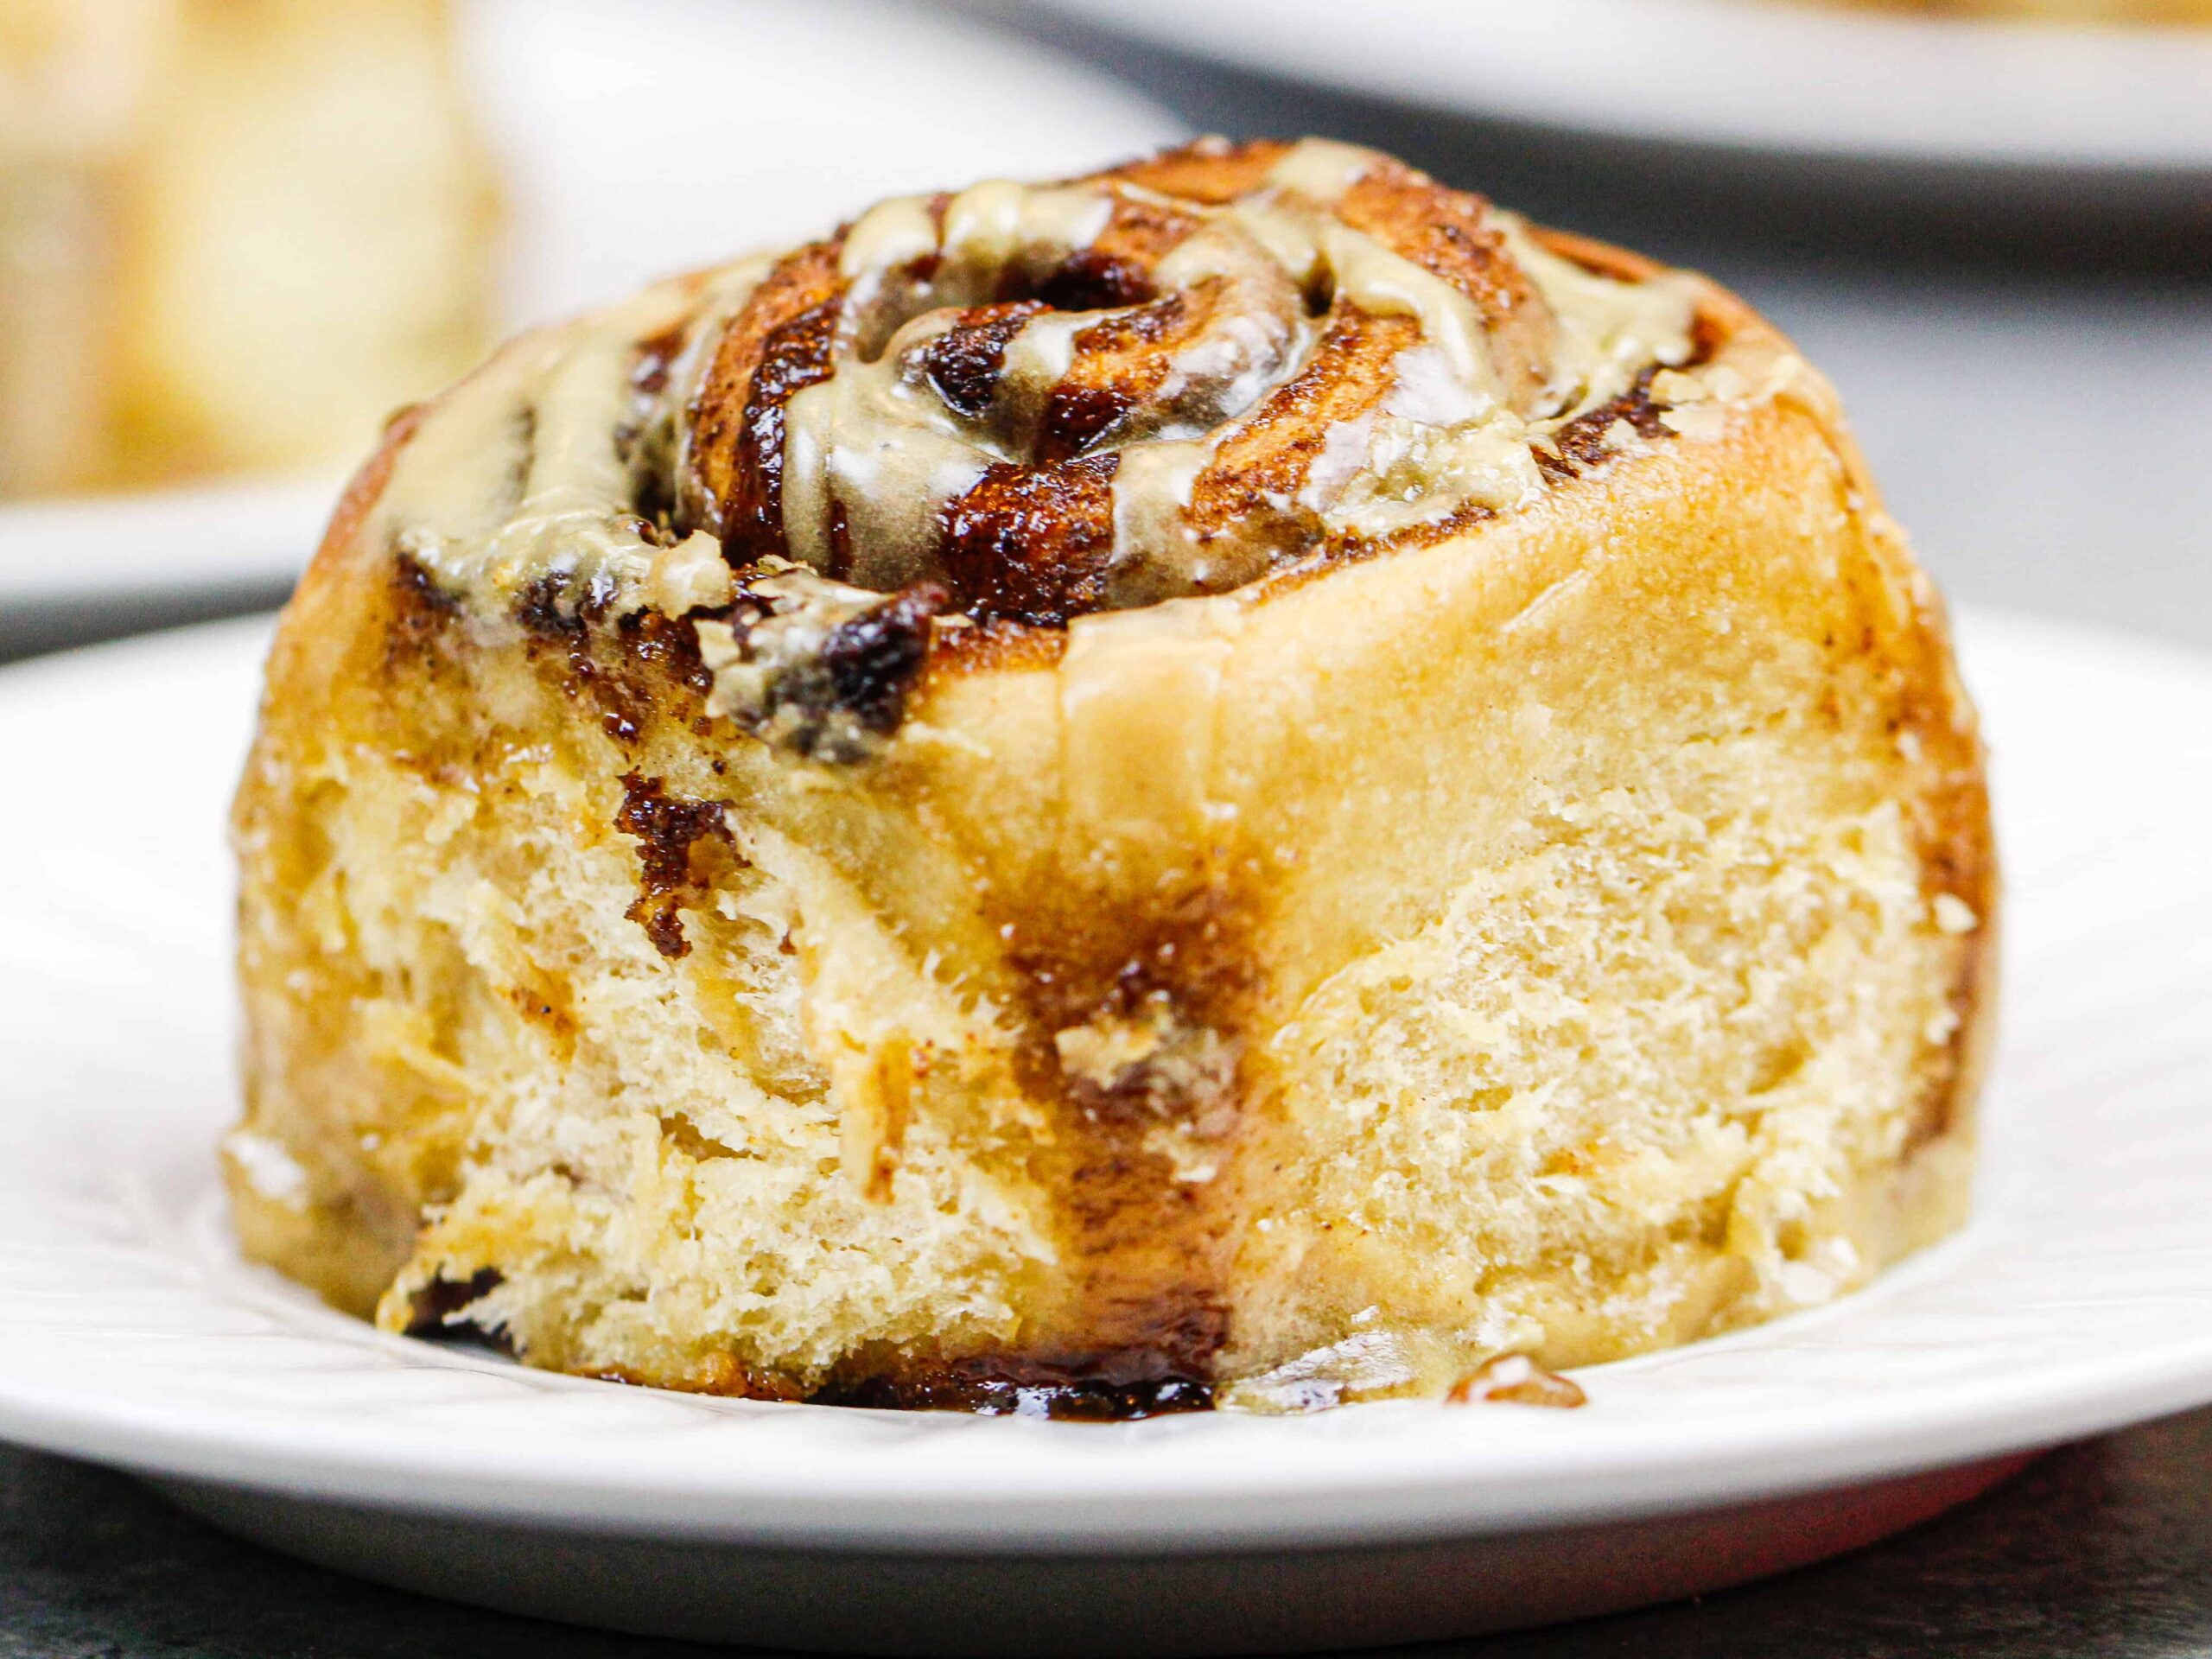 image of a coffee flavored cinnamon roll on a plate